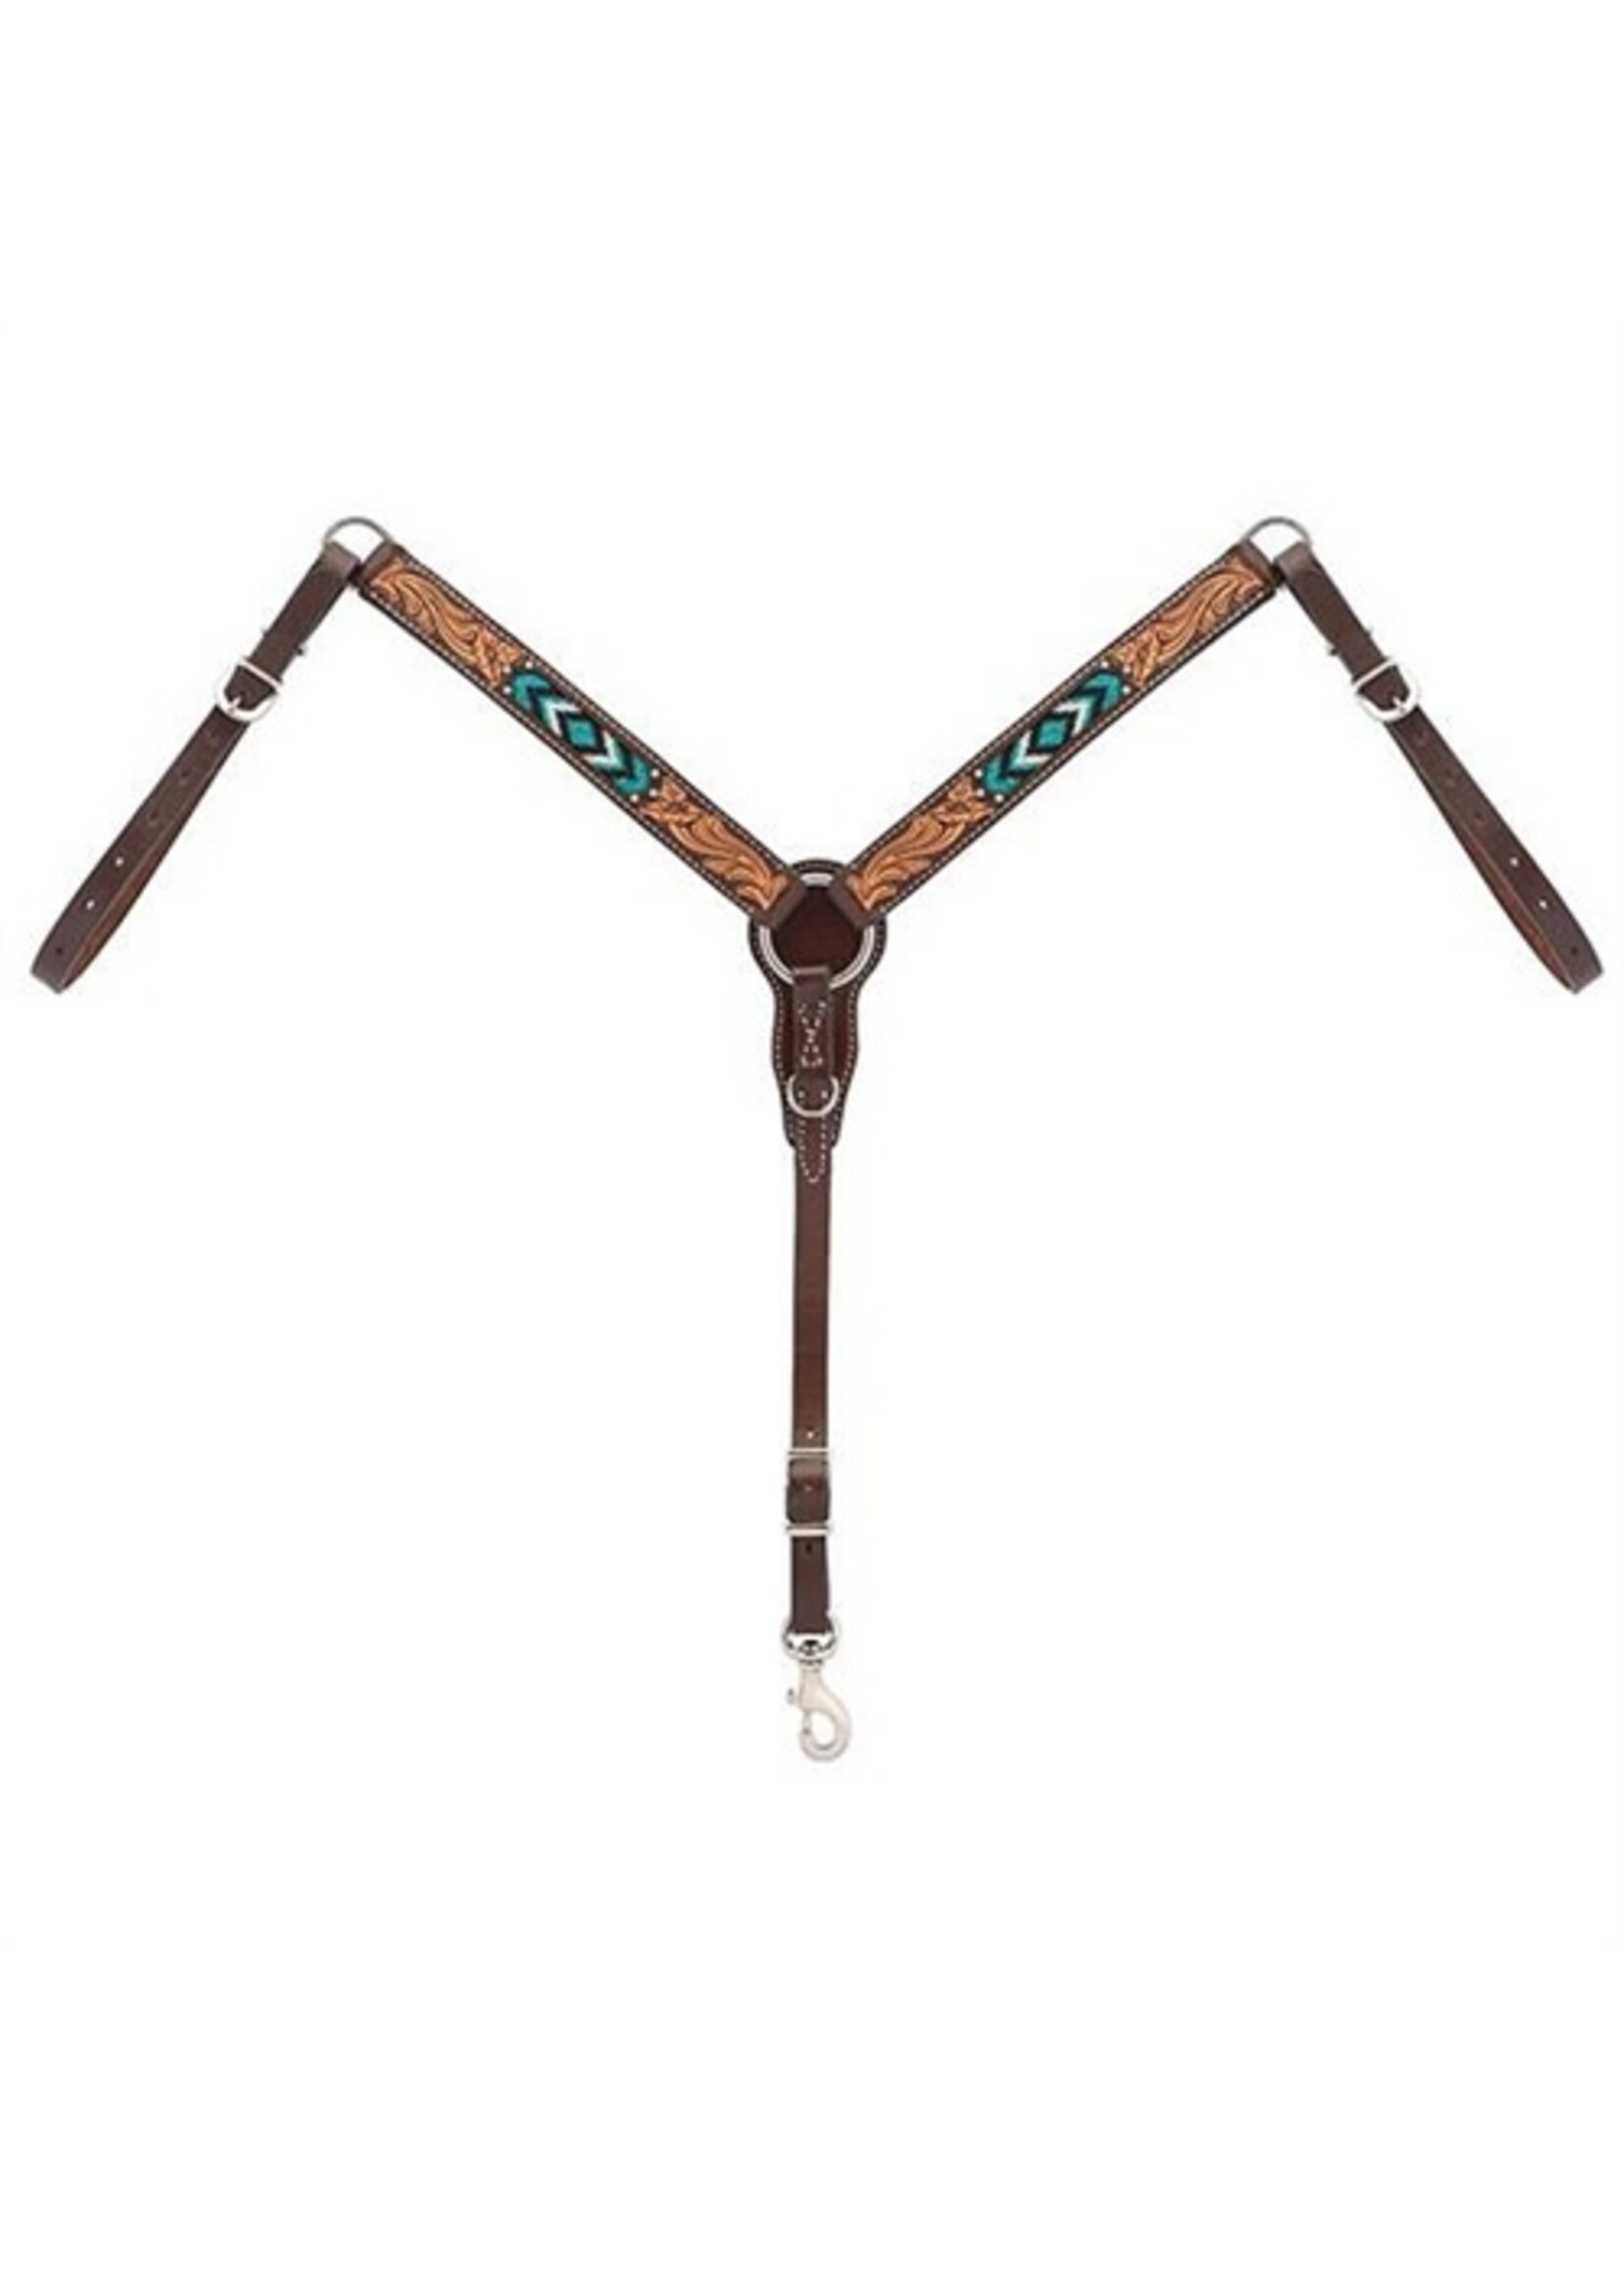 Weaver Pony Breast Collar - Turquoise Beaded Floral